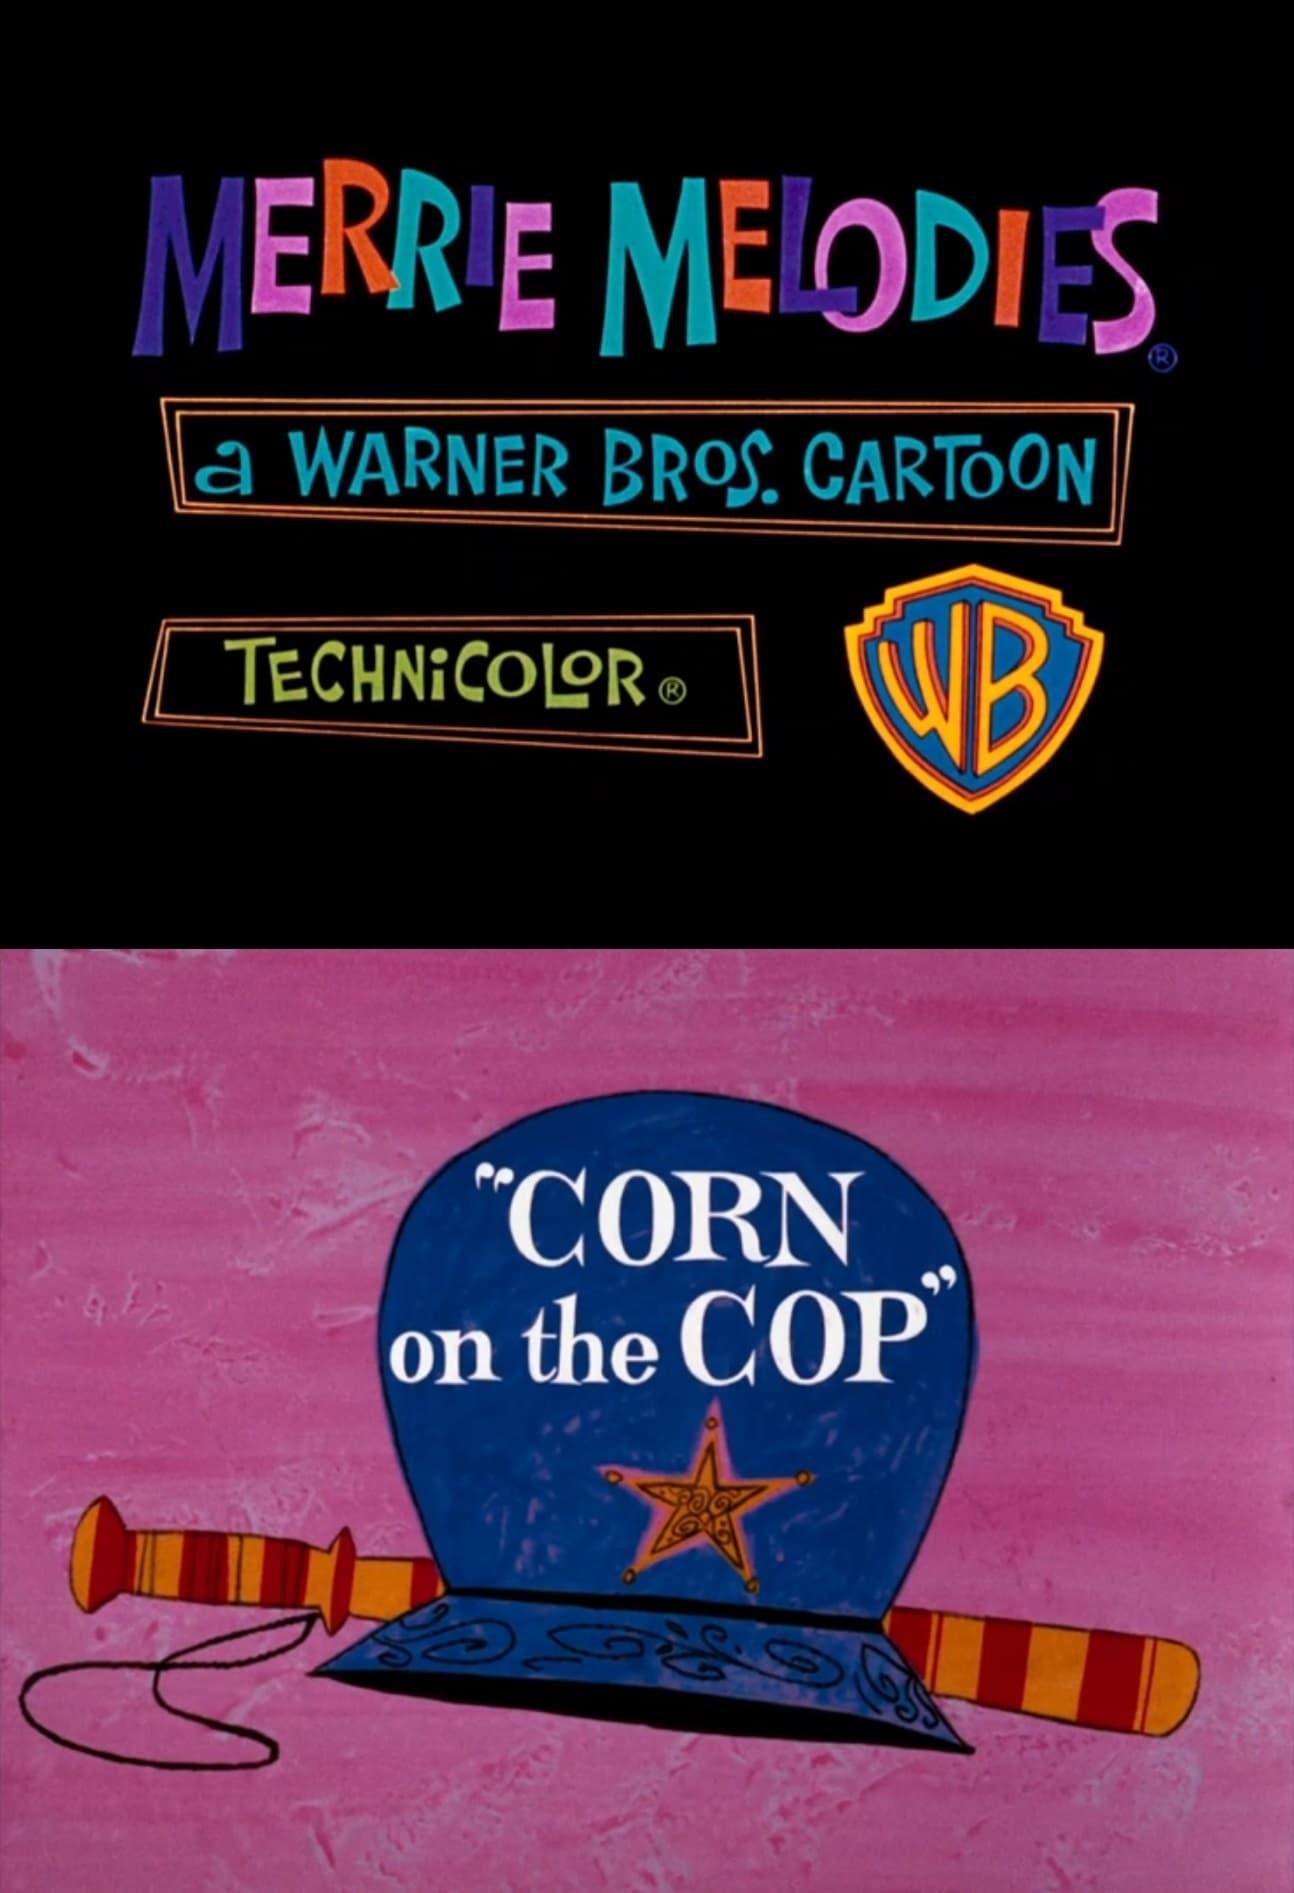 Corn on the Cop poster